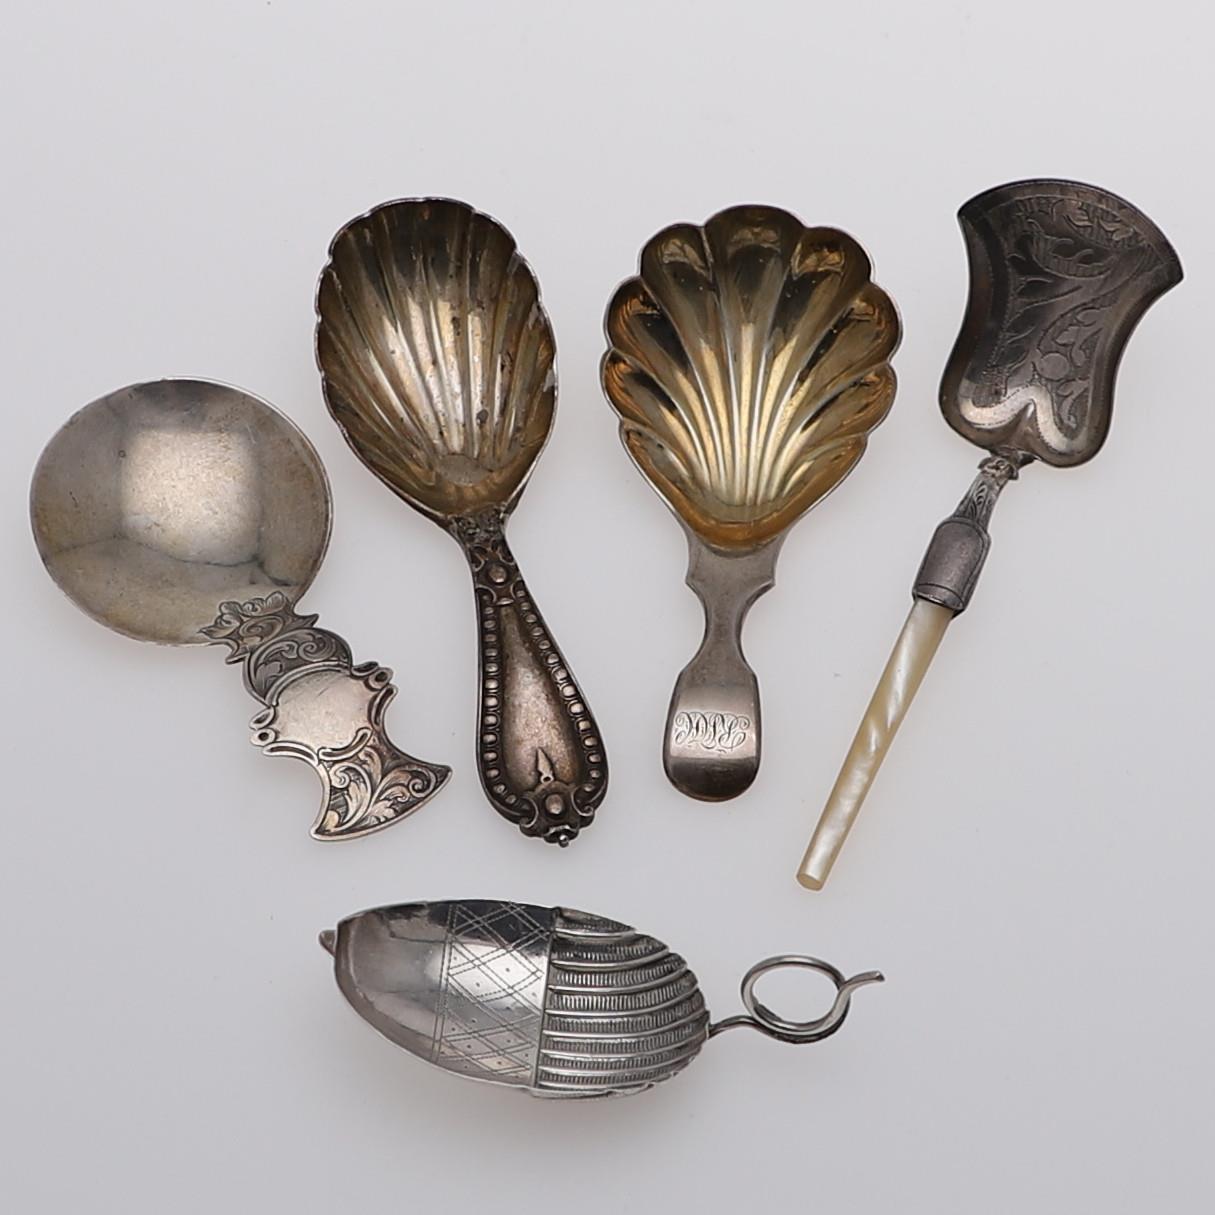 FIVE VARIOUS ANTIQUE CADDY SPOONS:-.